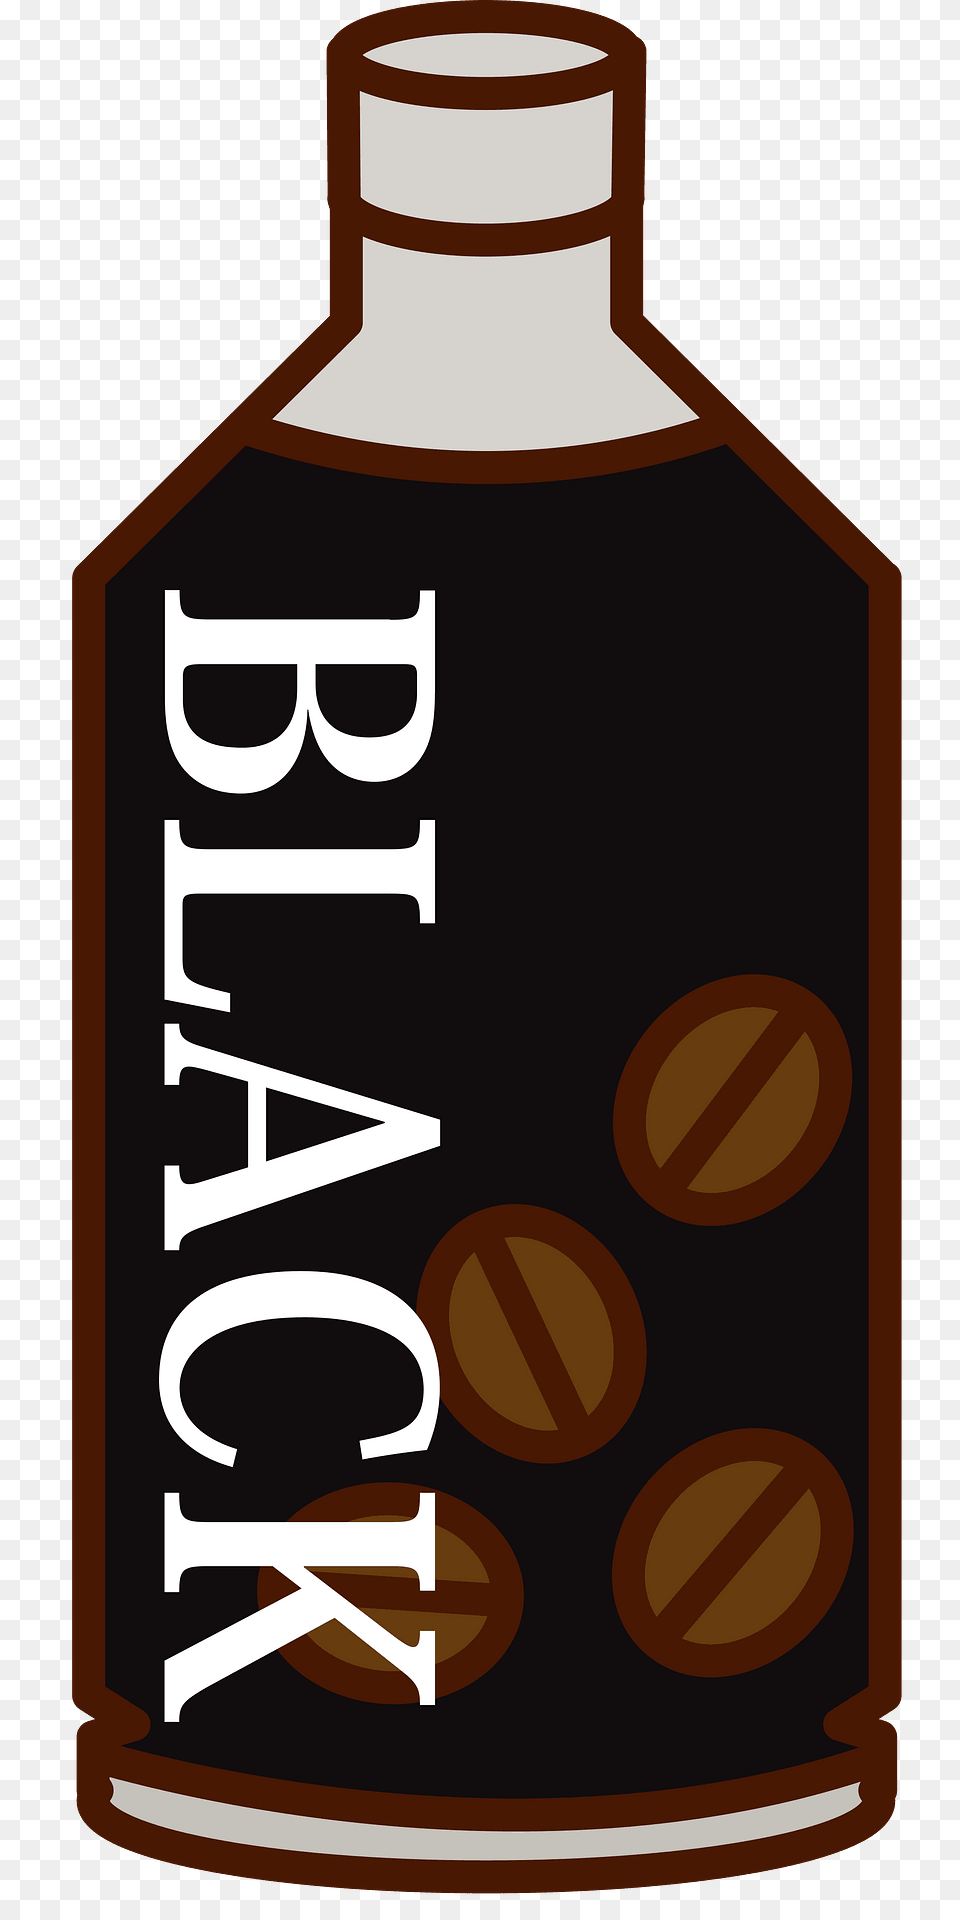 Bottle Of Coffee Clipart Png Image